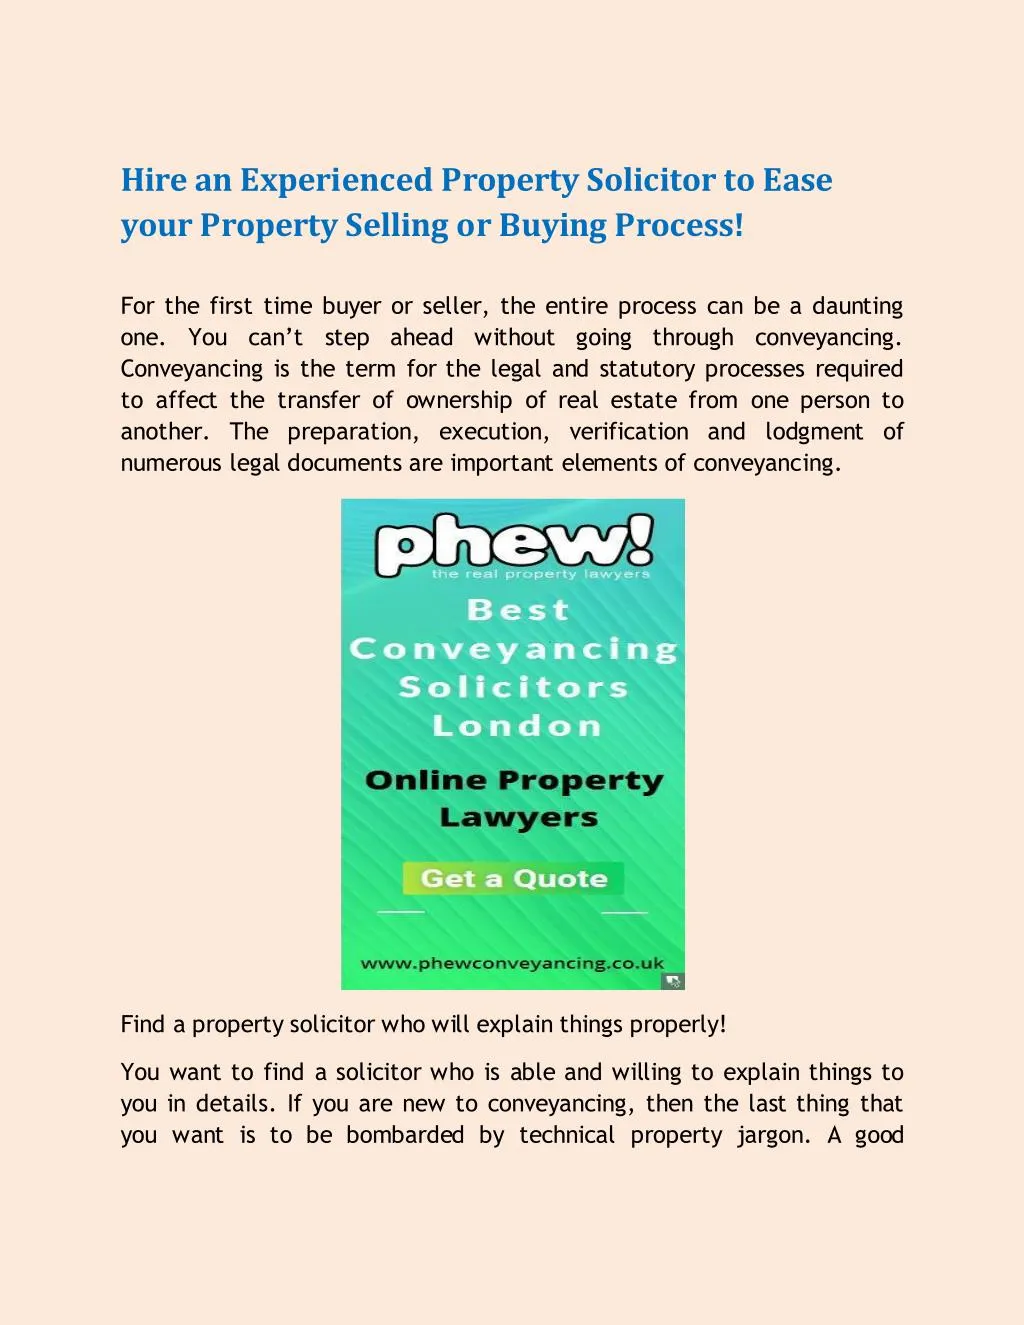 hire an experienced property solicitor to ease